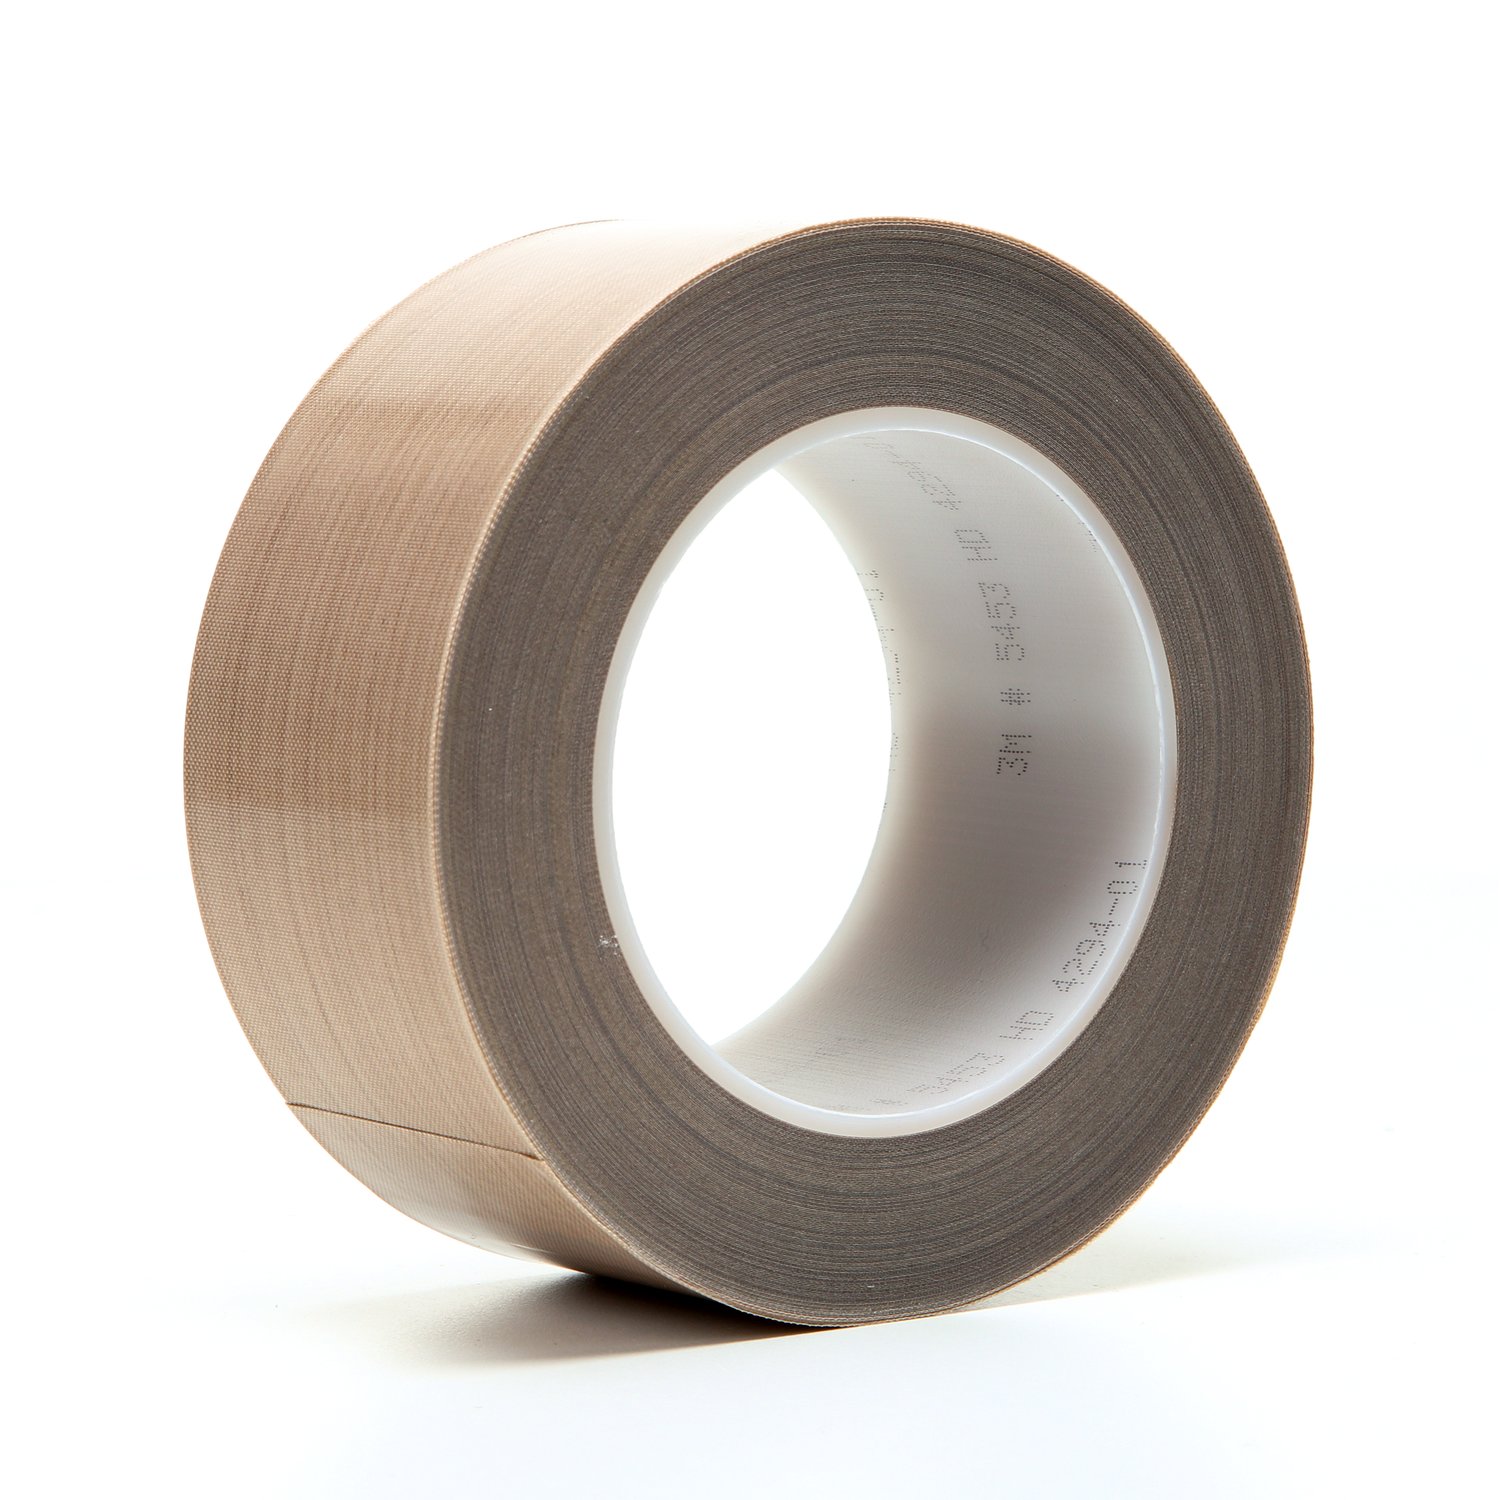 7000144794 - 3M PTFE Glass Cloth Tape 5453, Brown, 2 in x 36 yd, 8.2 mil, 6 rolls
per case, Boxed